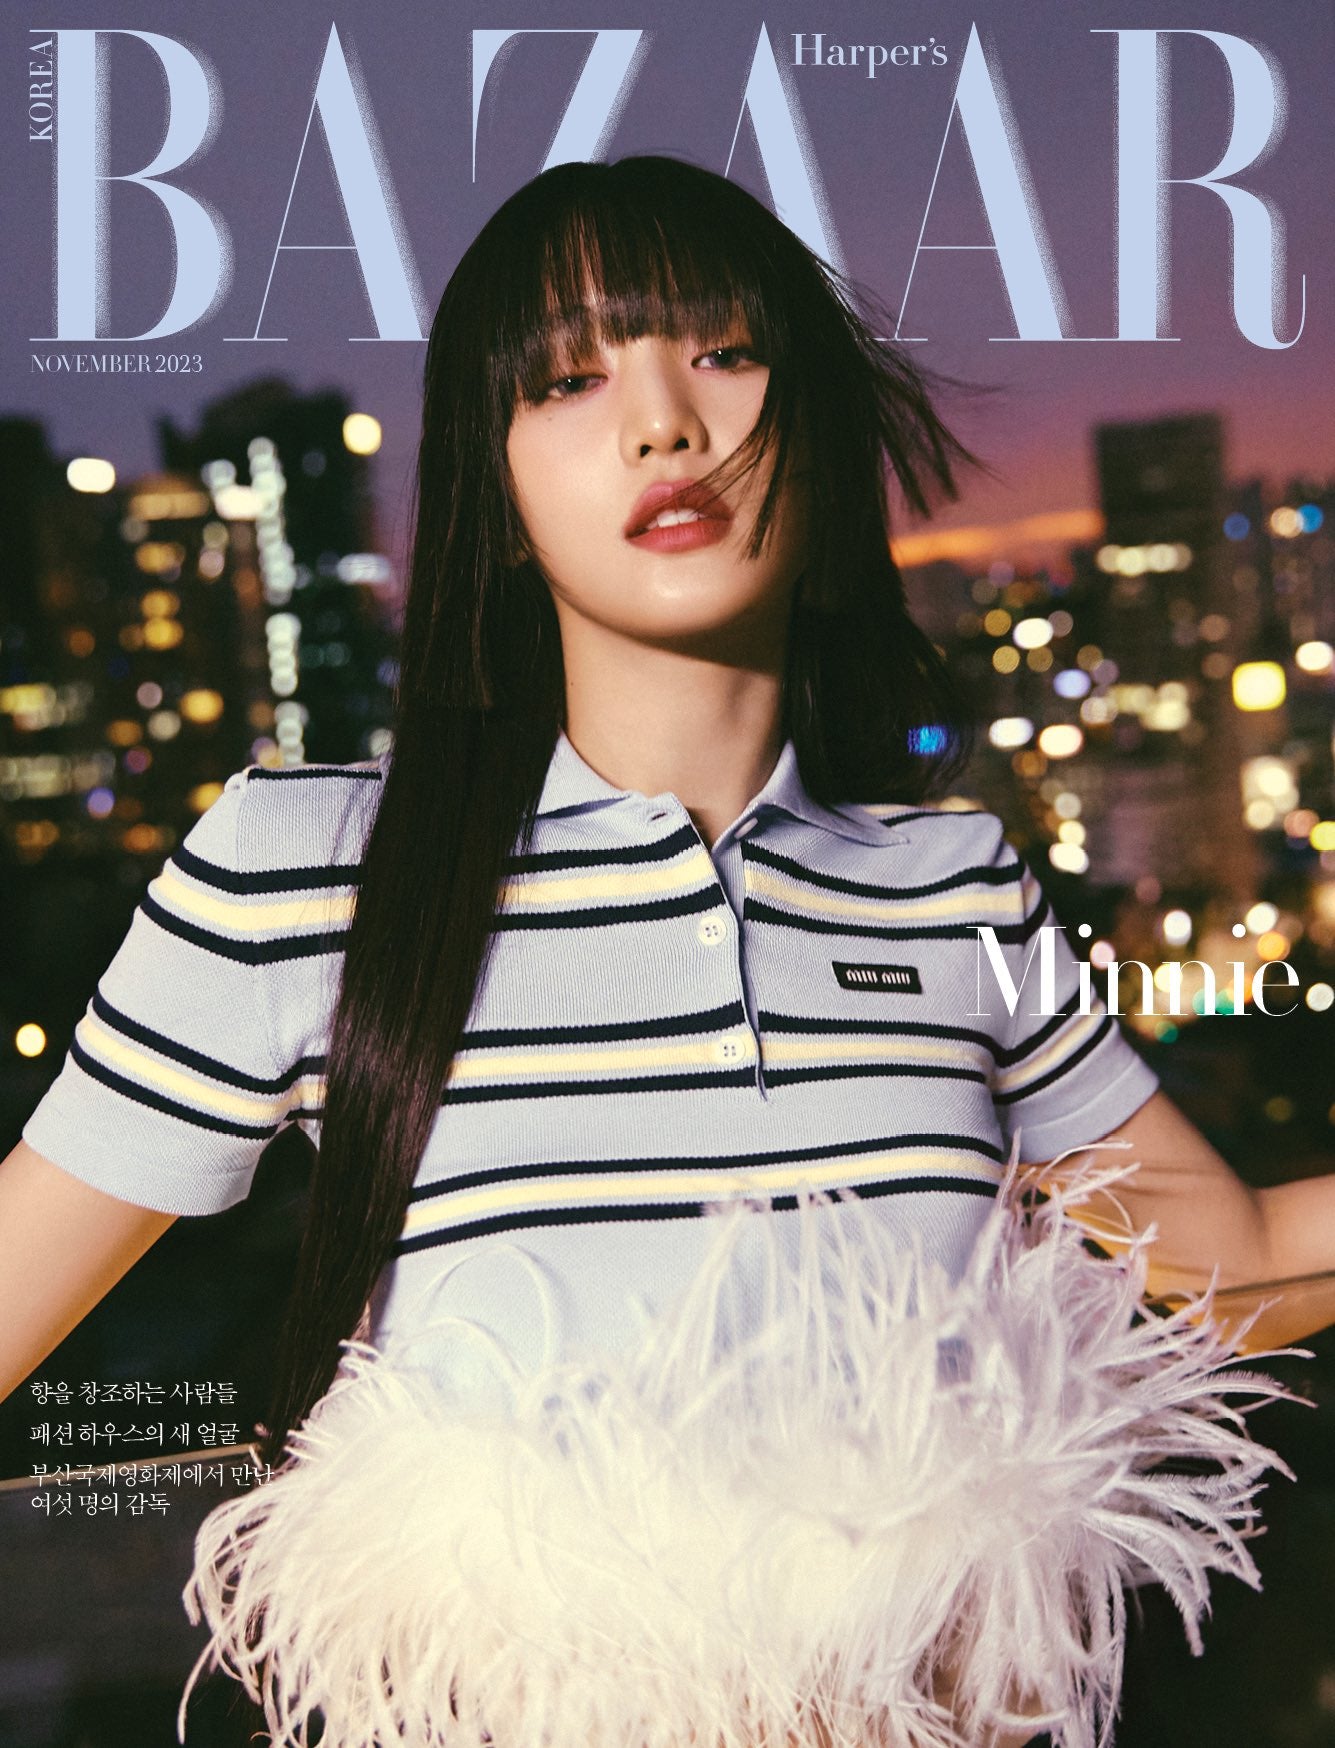 [PRE-ORDER] IVE JANG WON-YOUNG / IDLE MINNIE - HARPERS BAZAAR (WOMENS MONTHLY) 2023